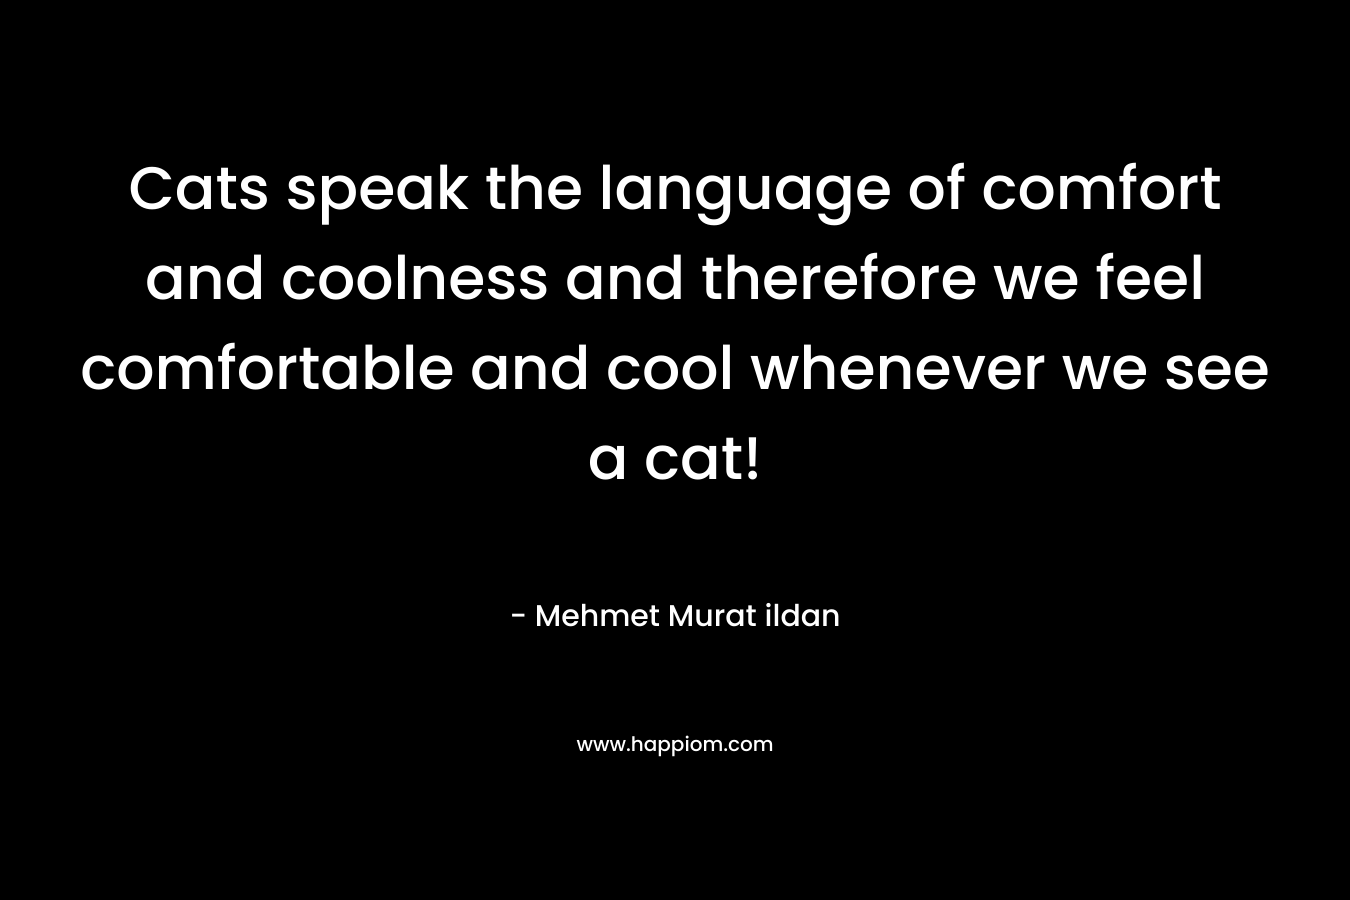 Cats speak the language of comfort and coolness and therefore we feel comfortable and cool whenever we see a cat! – Mehmet Murat ildan